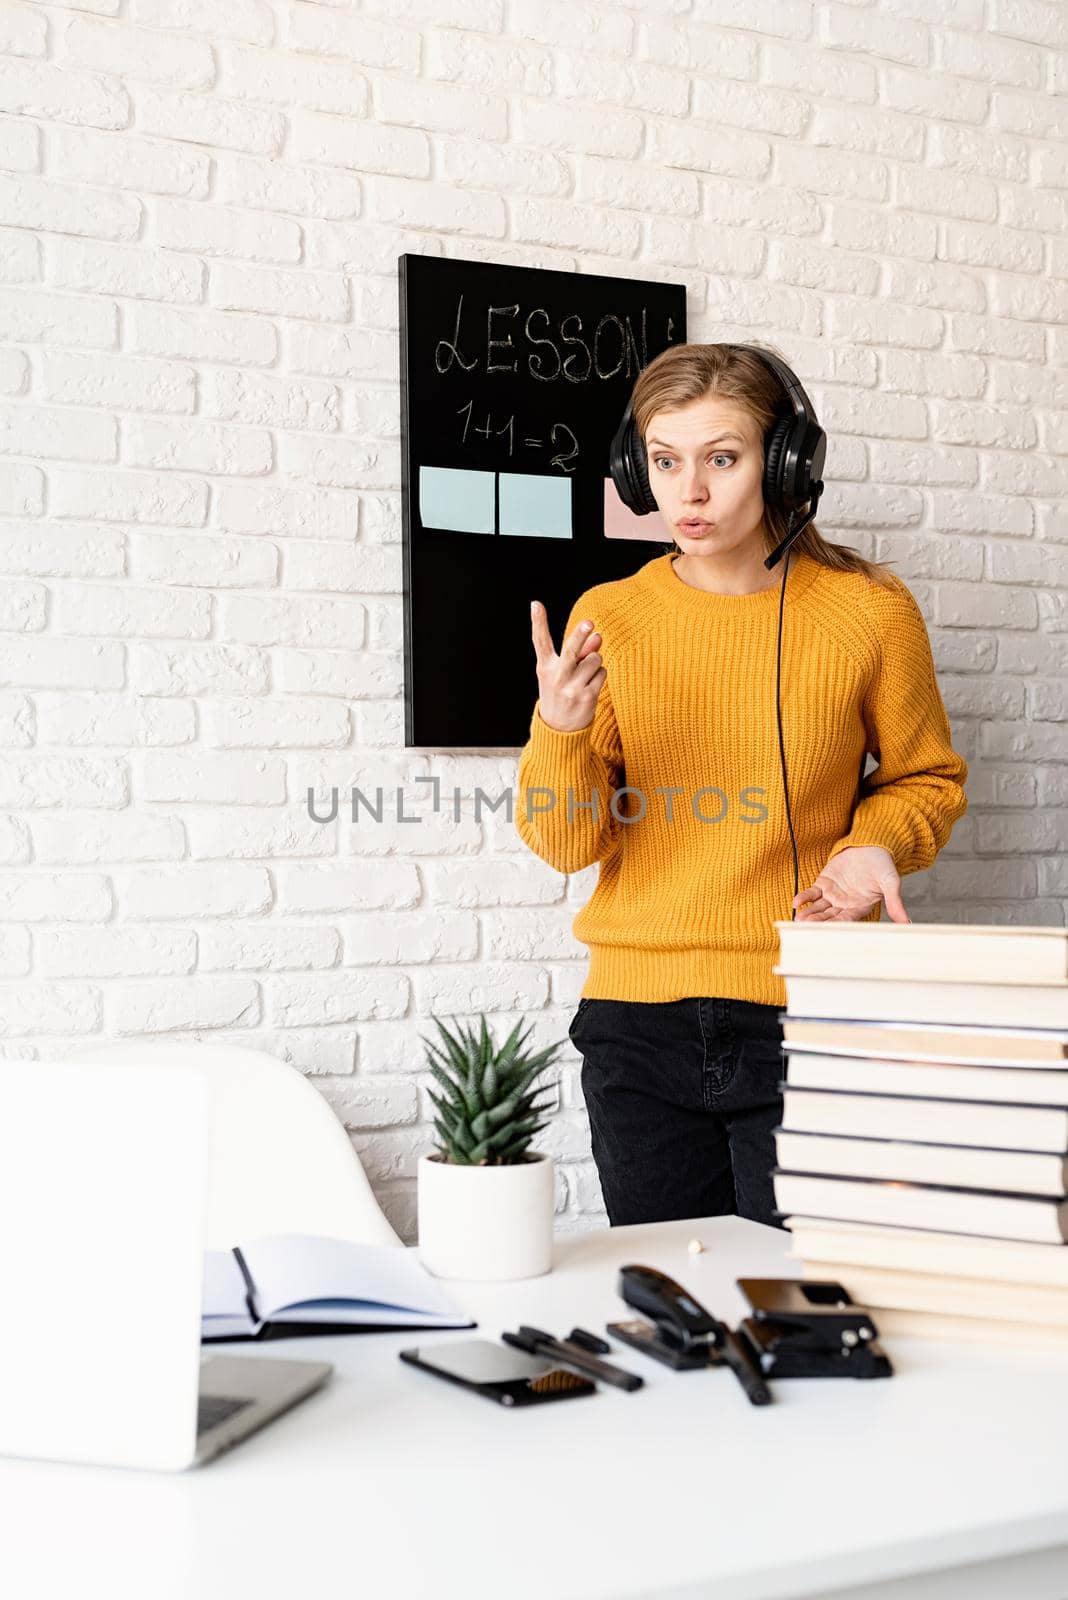 Distance learning. E-learning. Young smiling woman in yellow sweater and black headphones teaching online using video chat on laptop